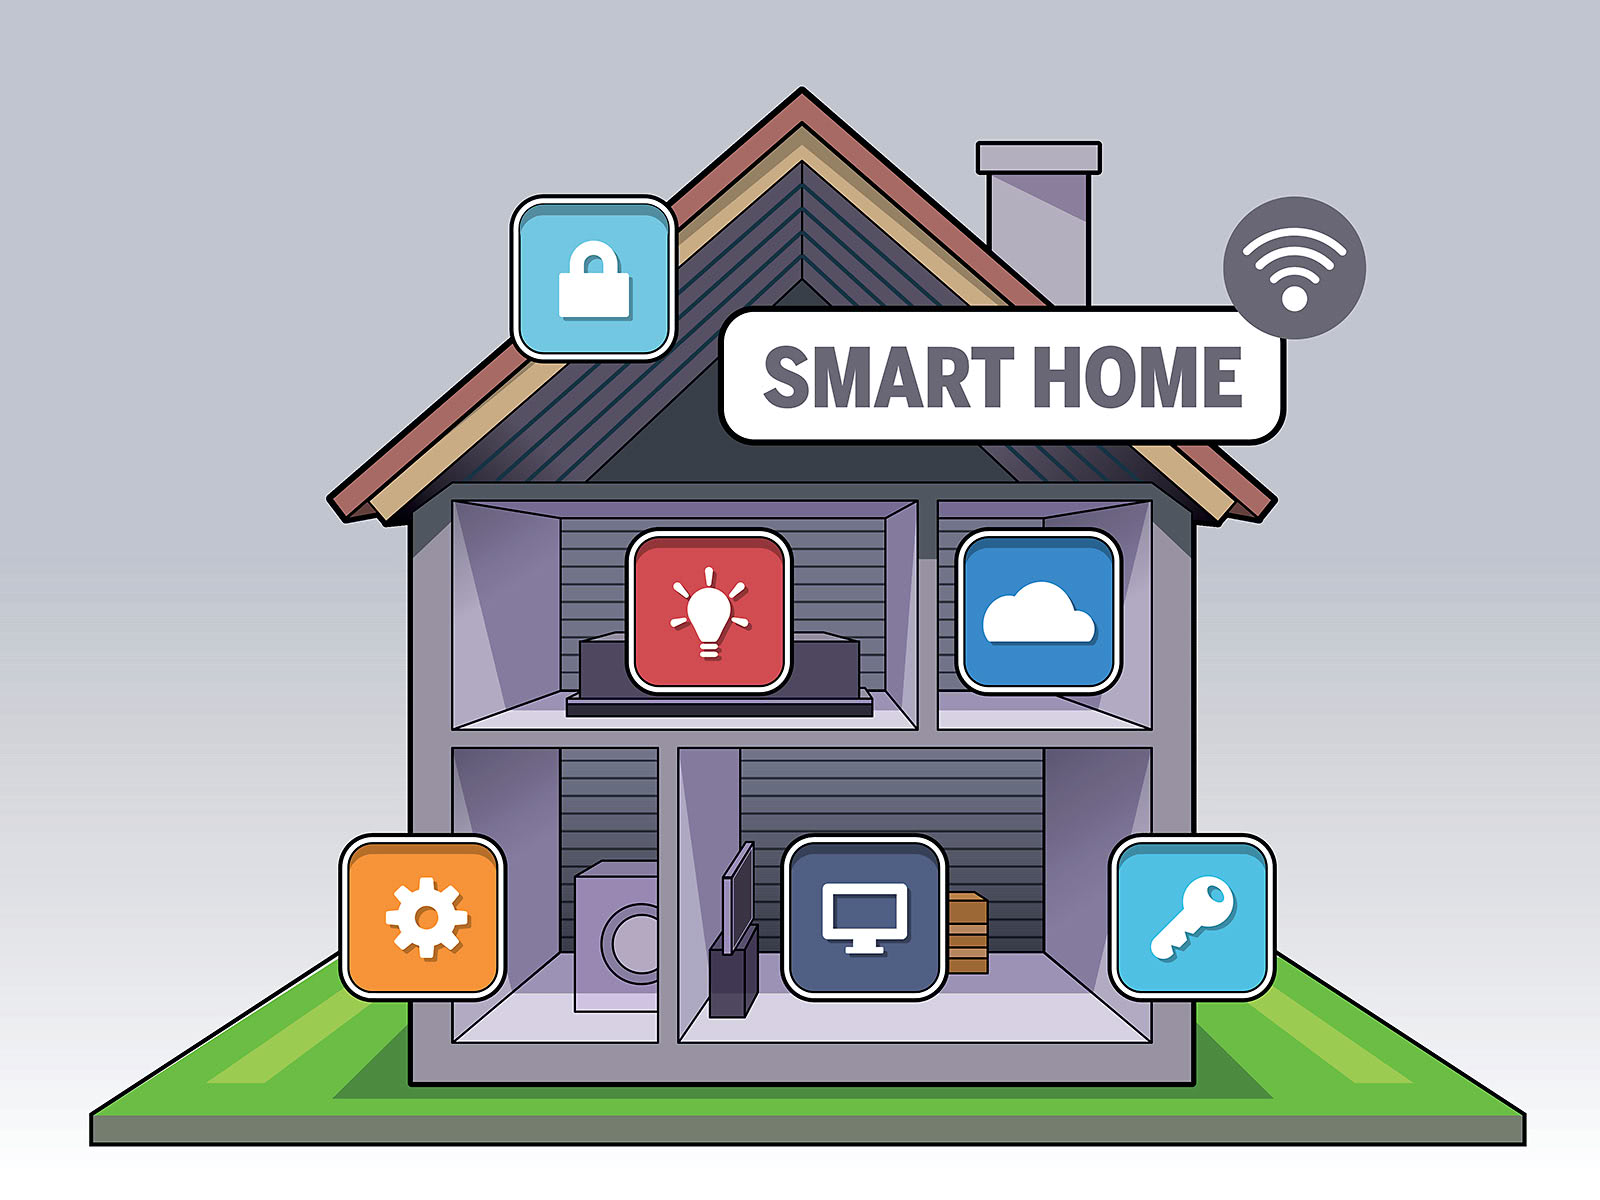 Home connections. Умный дом картинки. Smart Home connect. Триколор умный дом. Триколор умный дом видеонаблюдение.